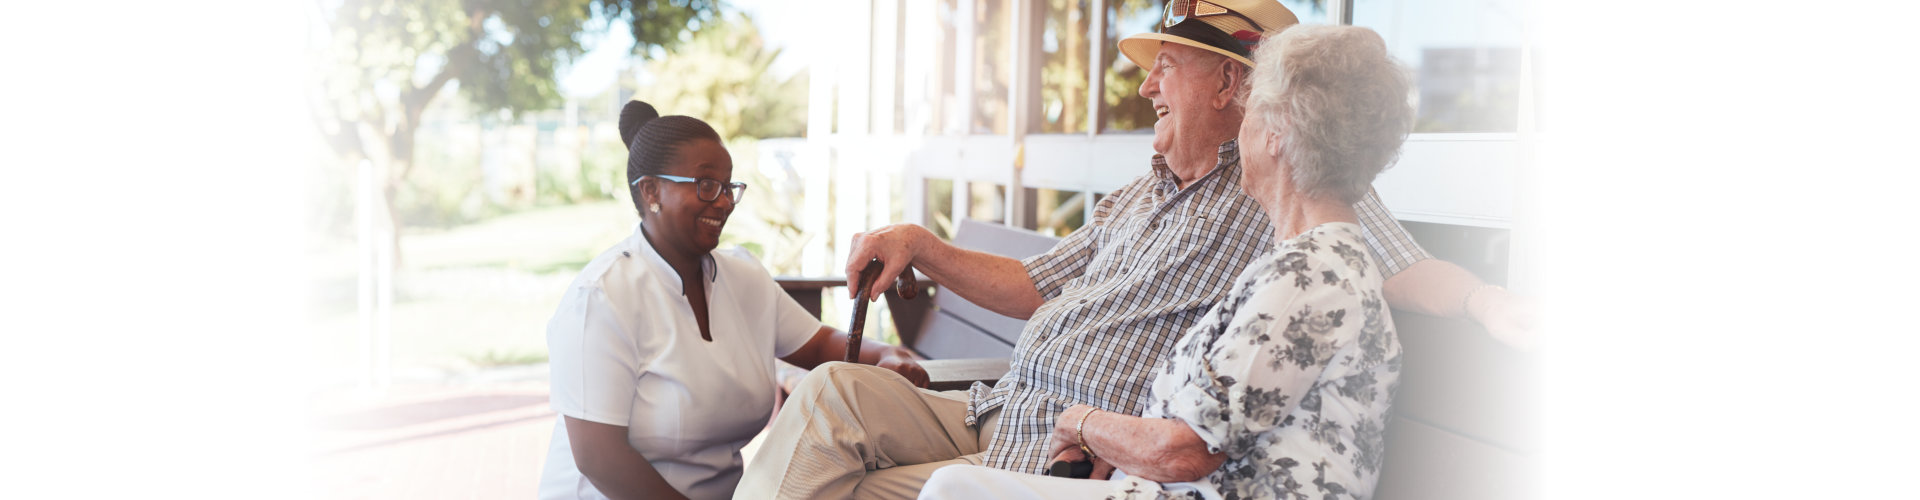 retired couple relaxing outdoor with female caregiver